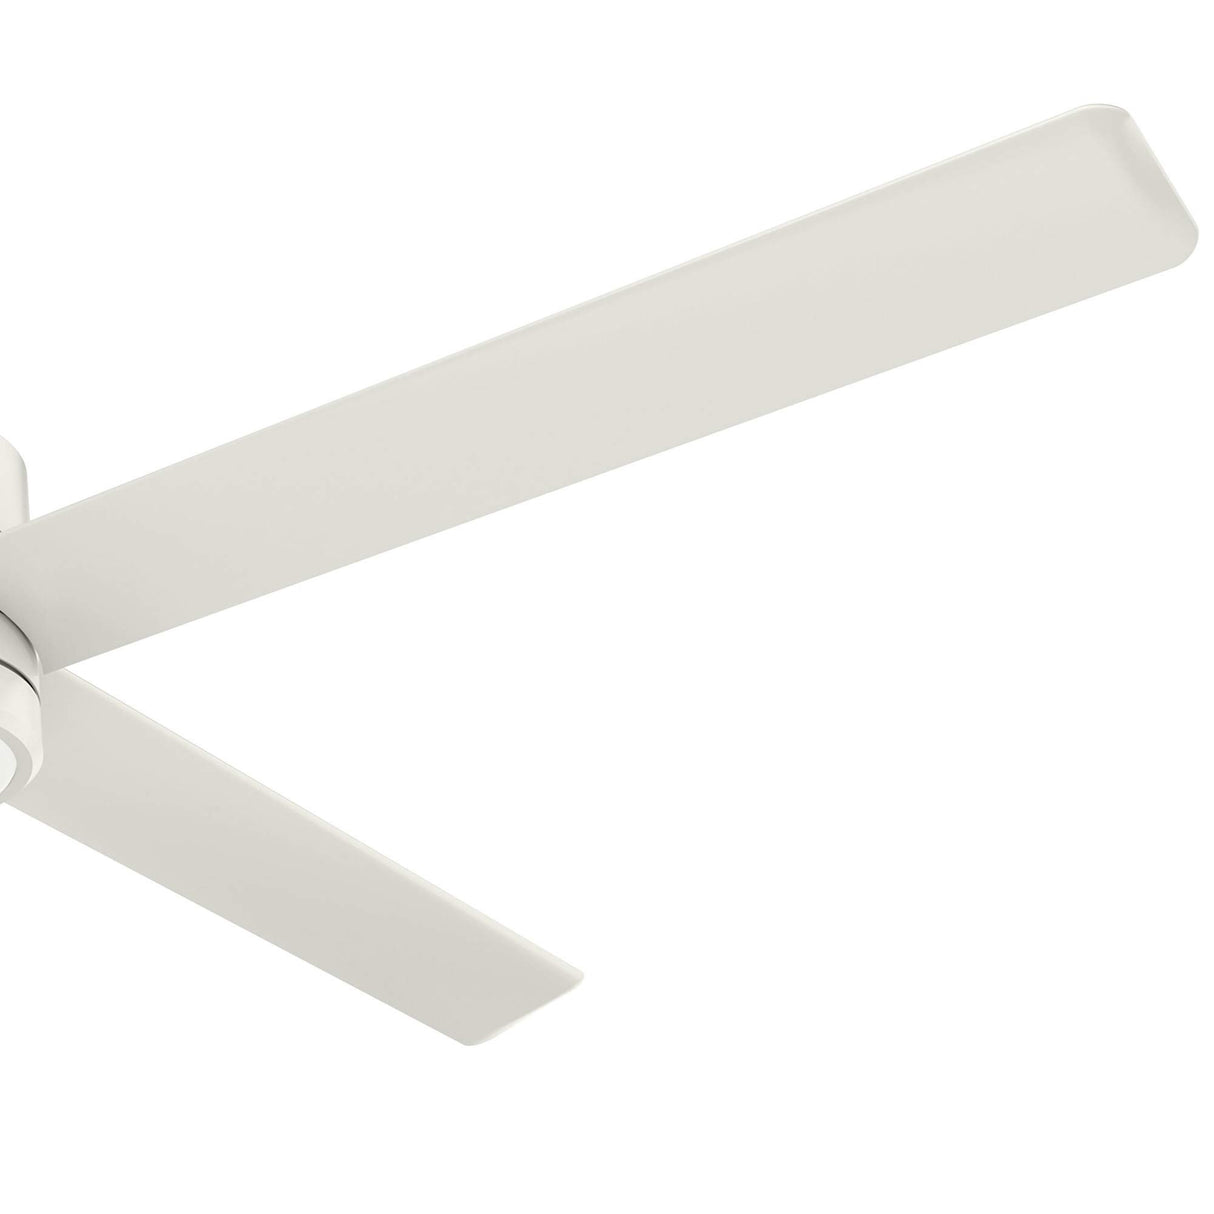 Hunter Trak Indoor / Outdoor Ceiling Fan with LED Light and Wall Control, 84", White